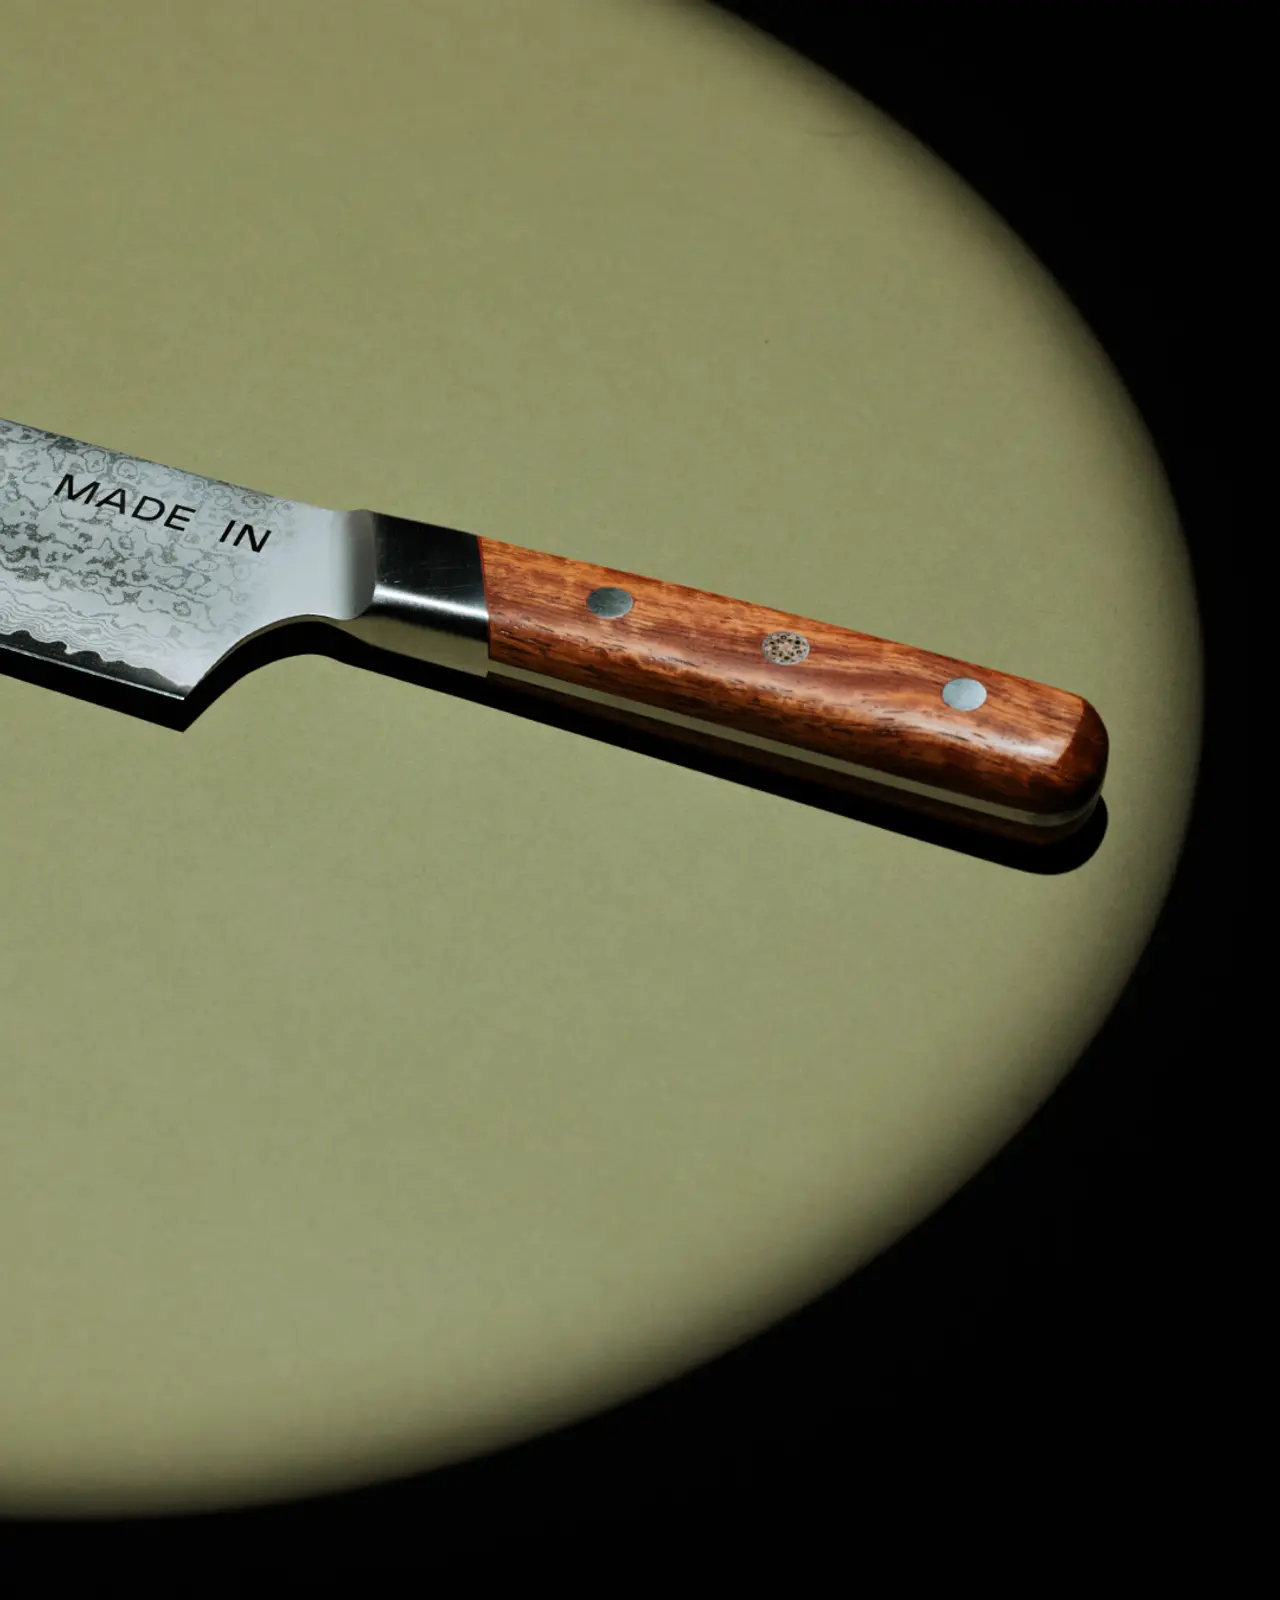 A wooden-handled pocket knife lies on a tan oval background, casting a slight shadow.